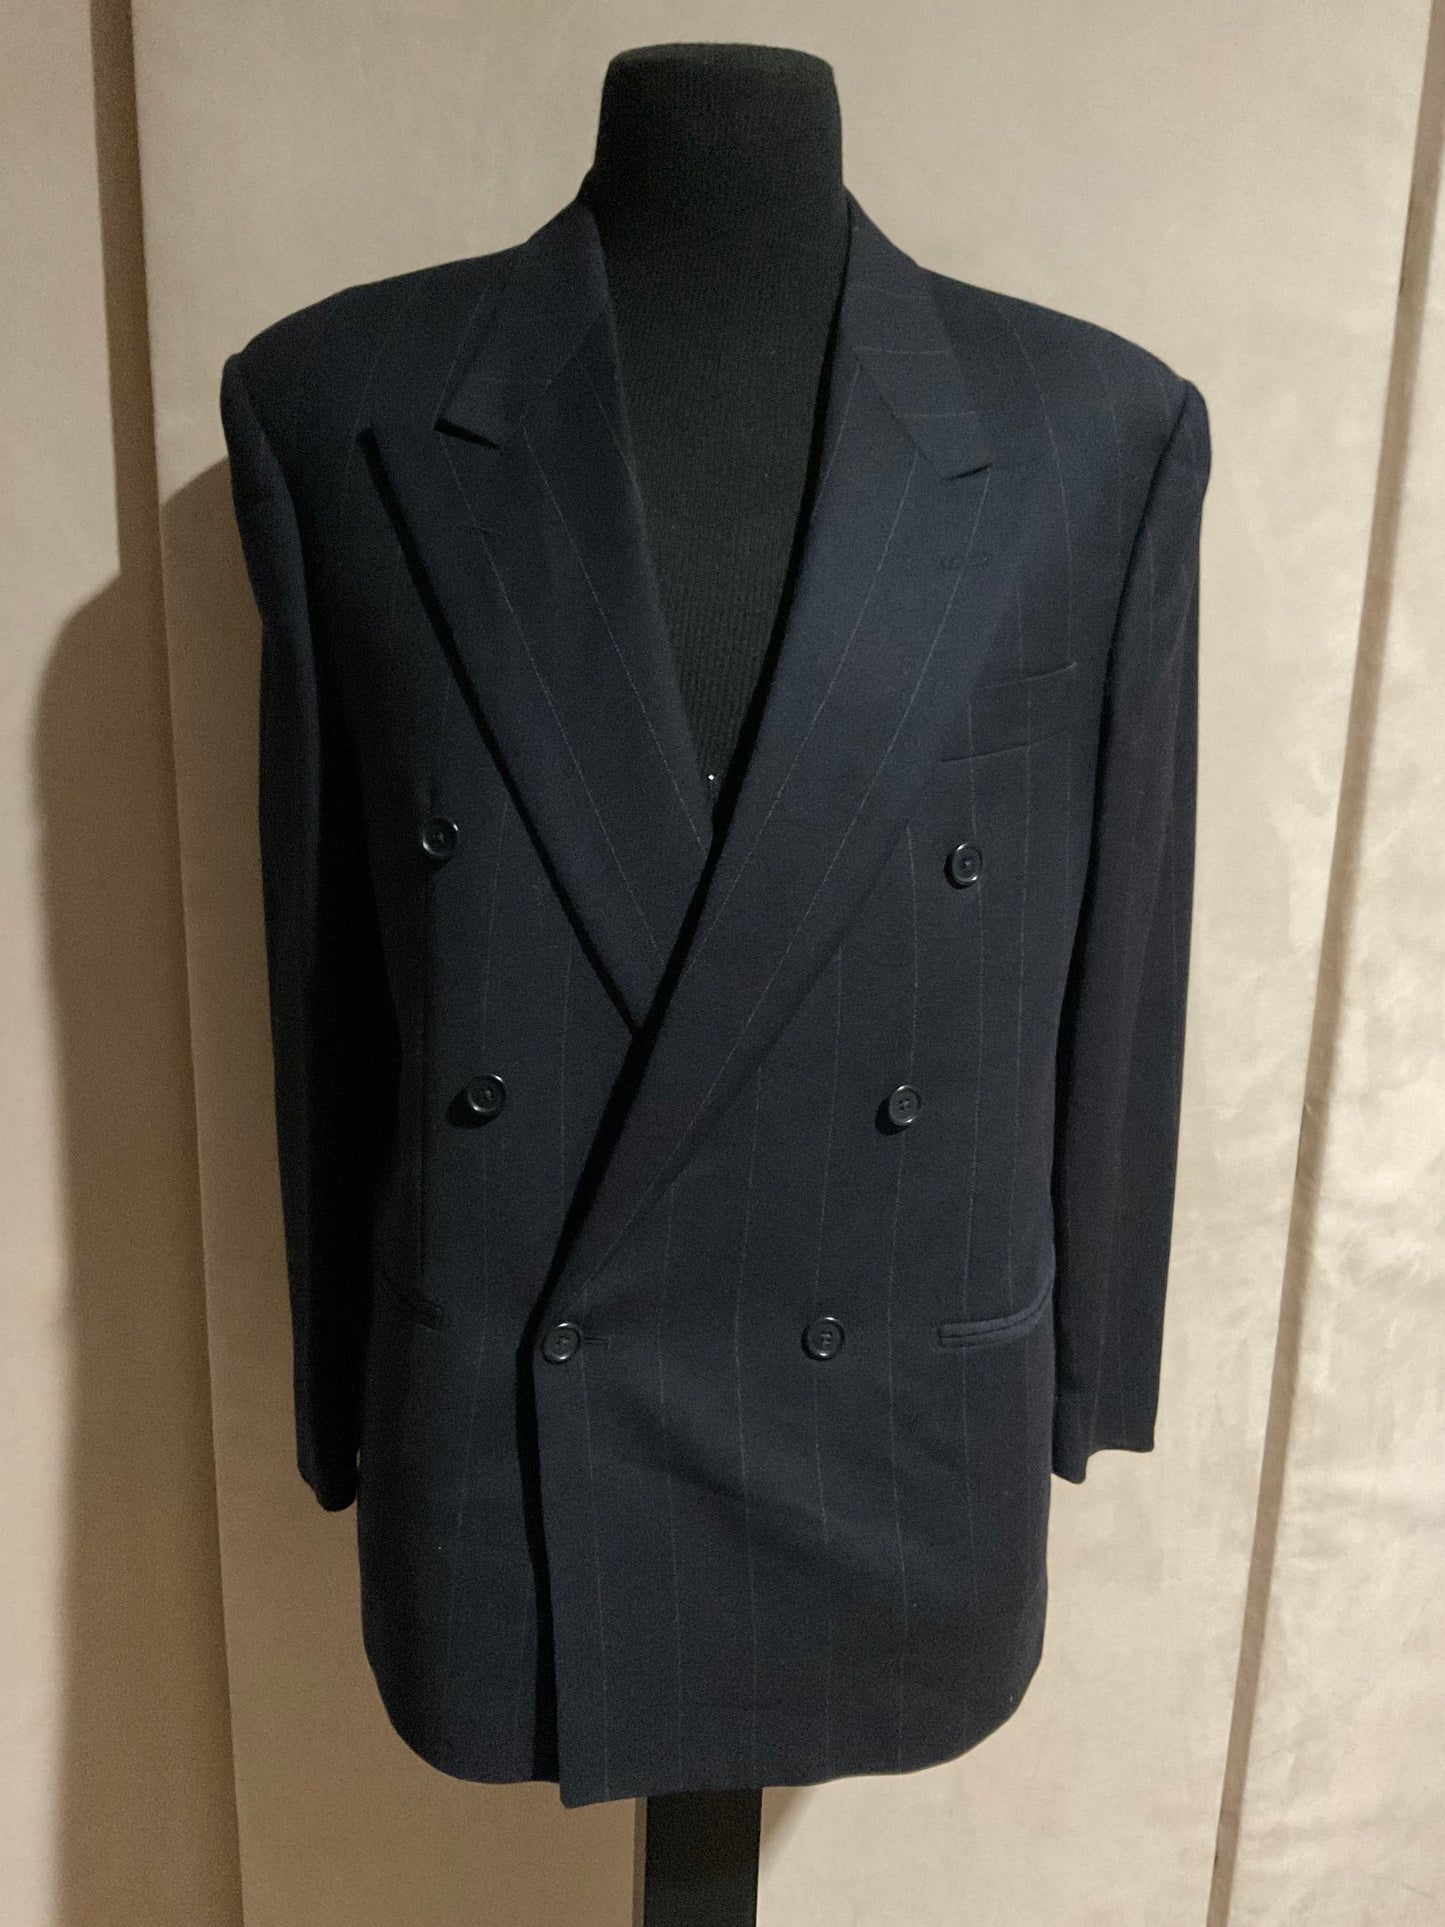 R P SUIT / DOUBLE BREASTED / NAVY STRIPE CREPE / 38 REG / MADE IN ITALY